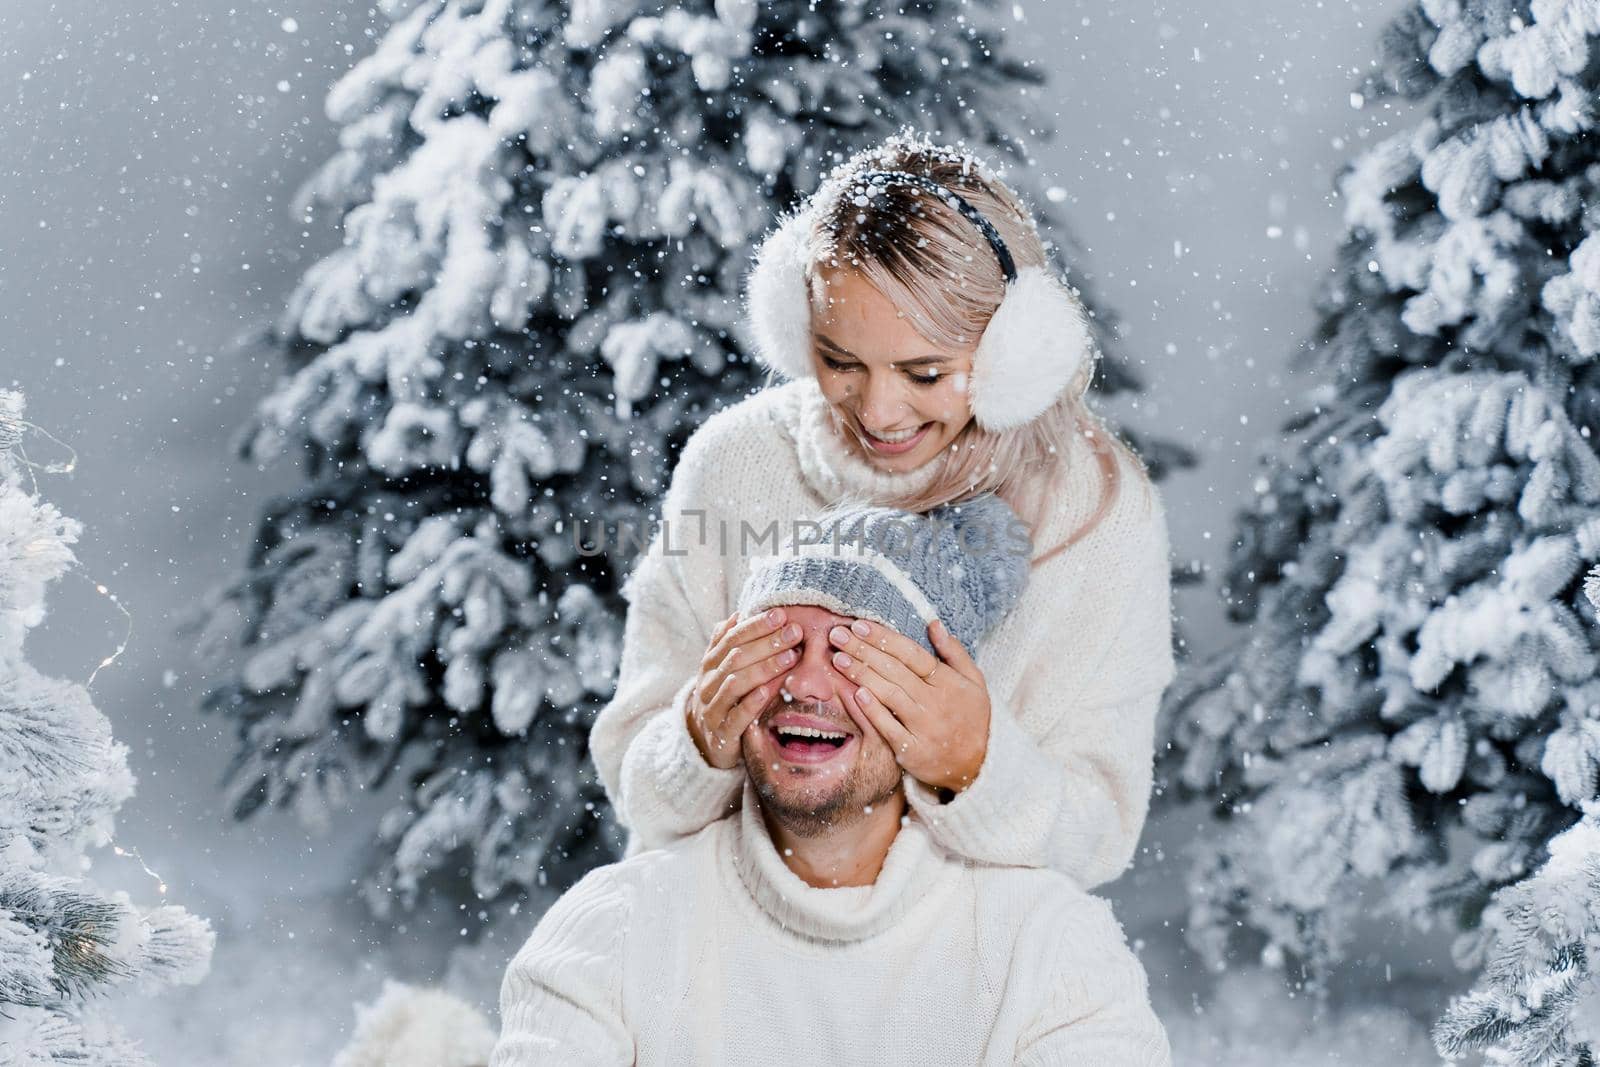 Couple seat on the snow and hug, kiss, and have fun each other. Winter love story before new year celebration. Waiting for christmas gift. Happy couple weared fur headphones, hats, white sweaters.